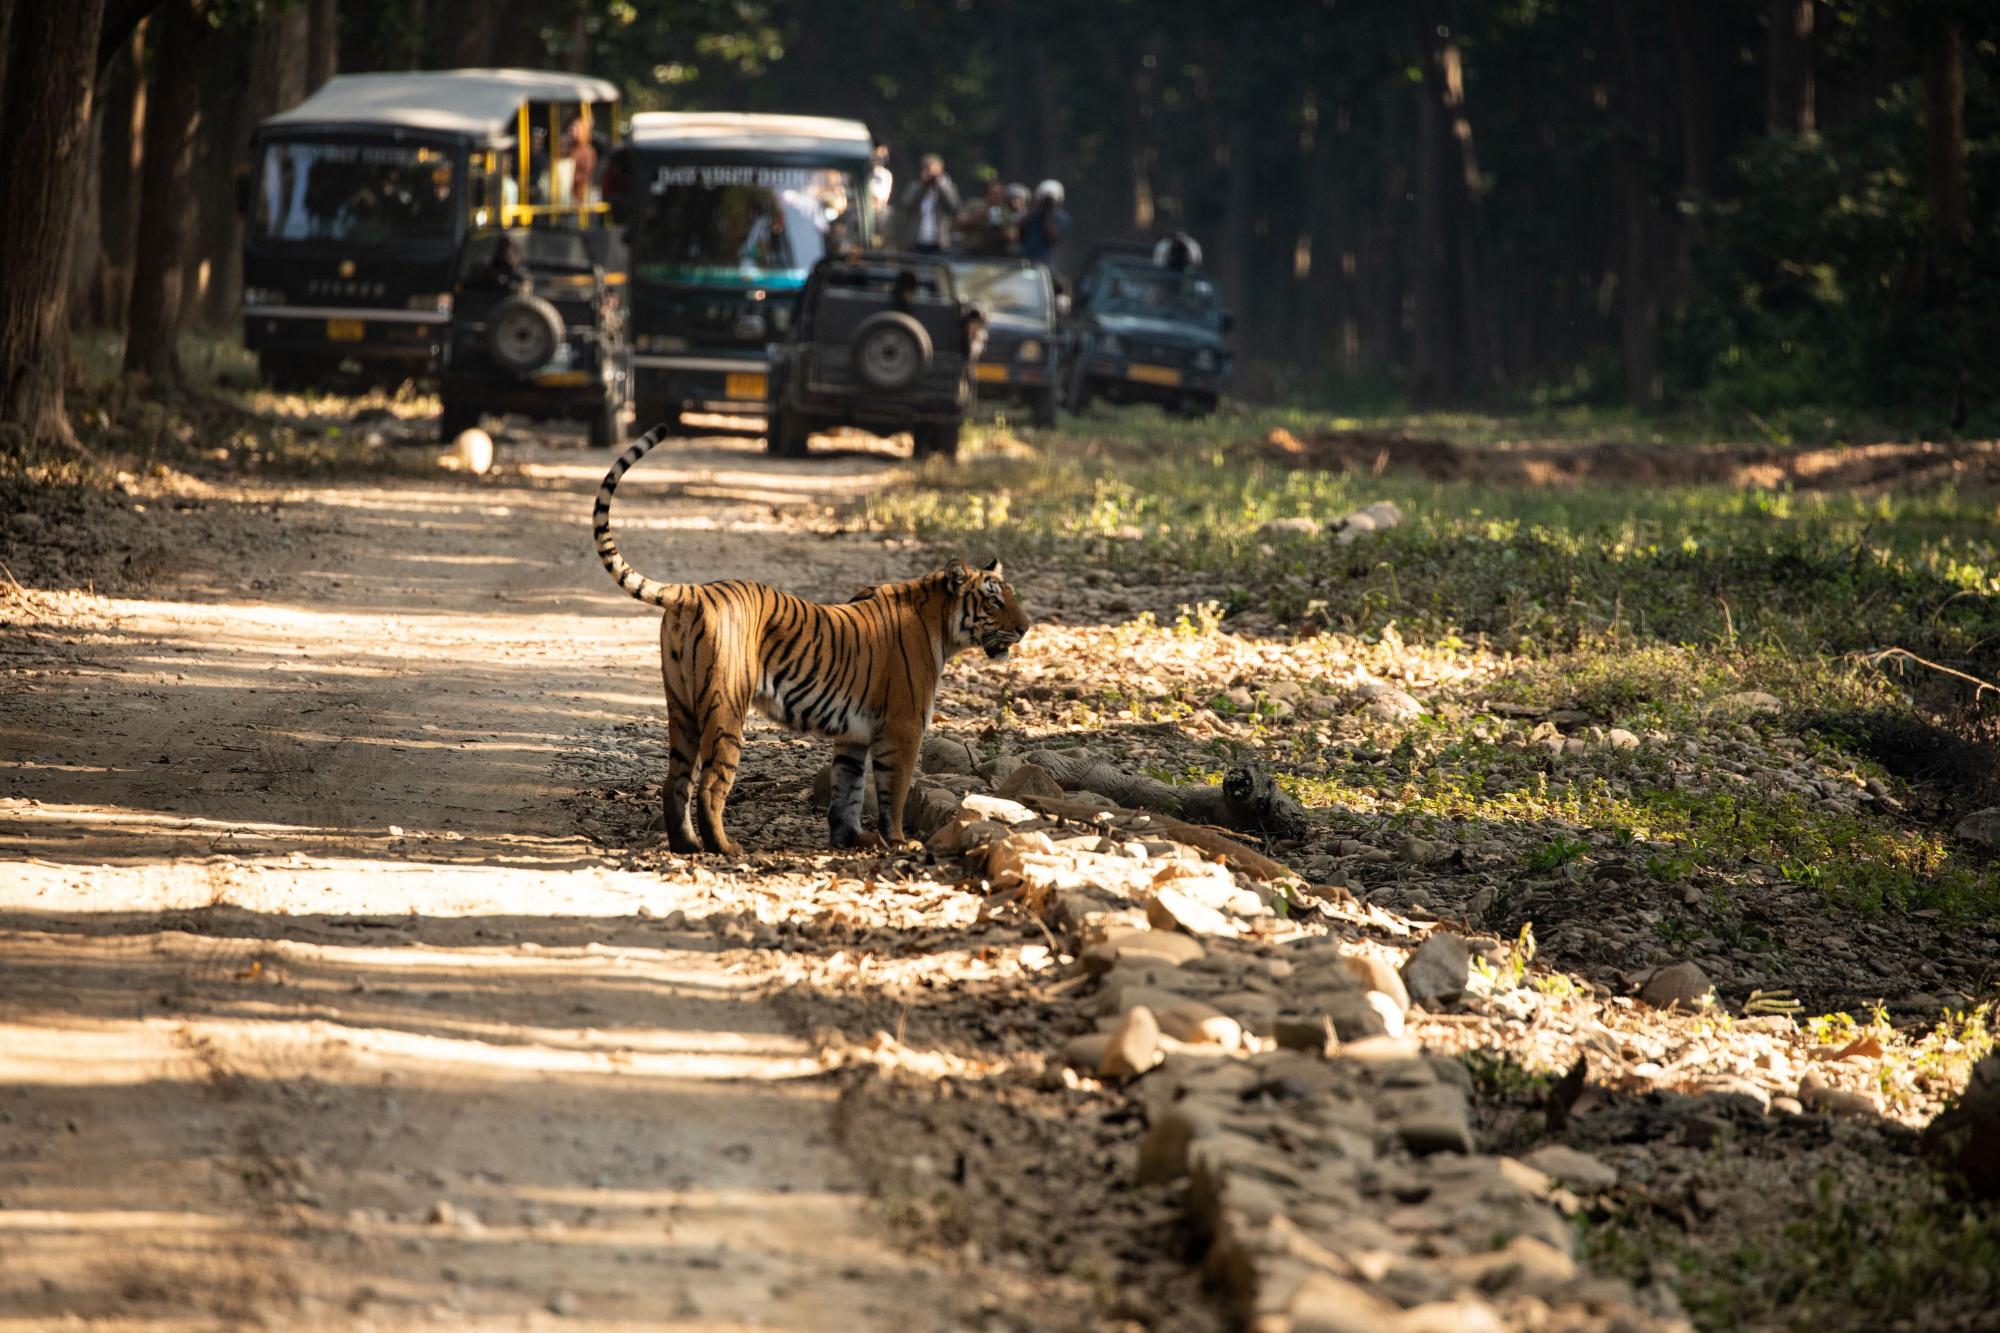 A majestic tiger strolling down a dusty road, followed closely by a line of jeeps.